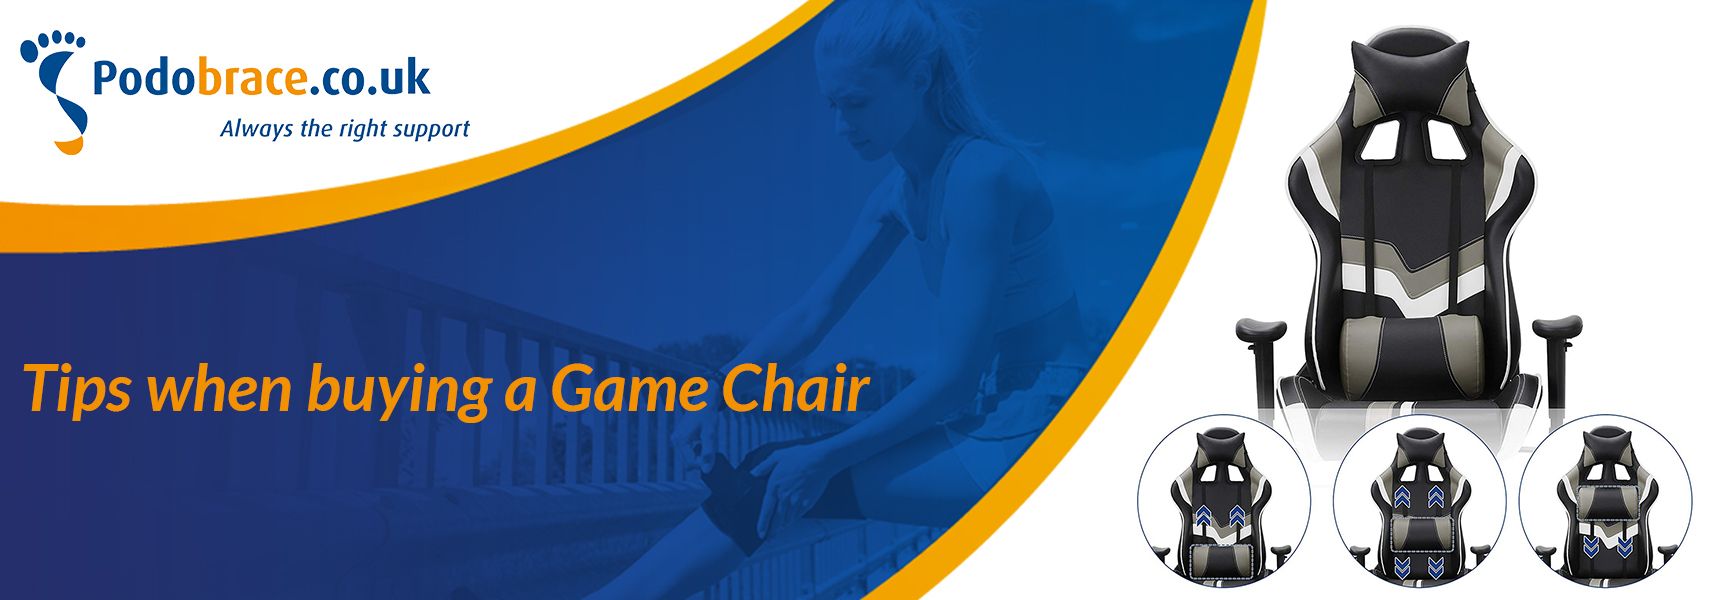 Tips when buying a game chair